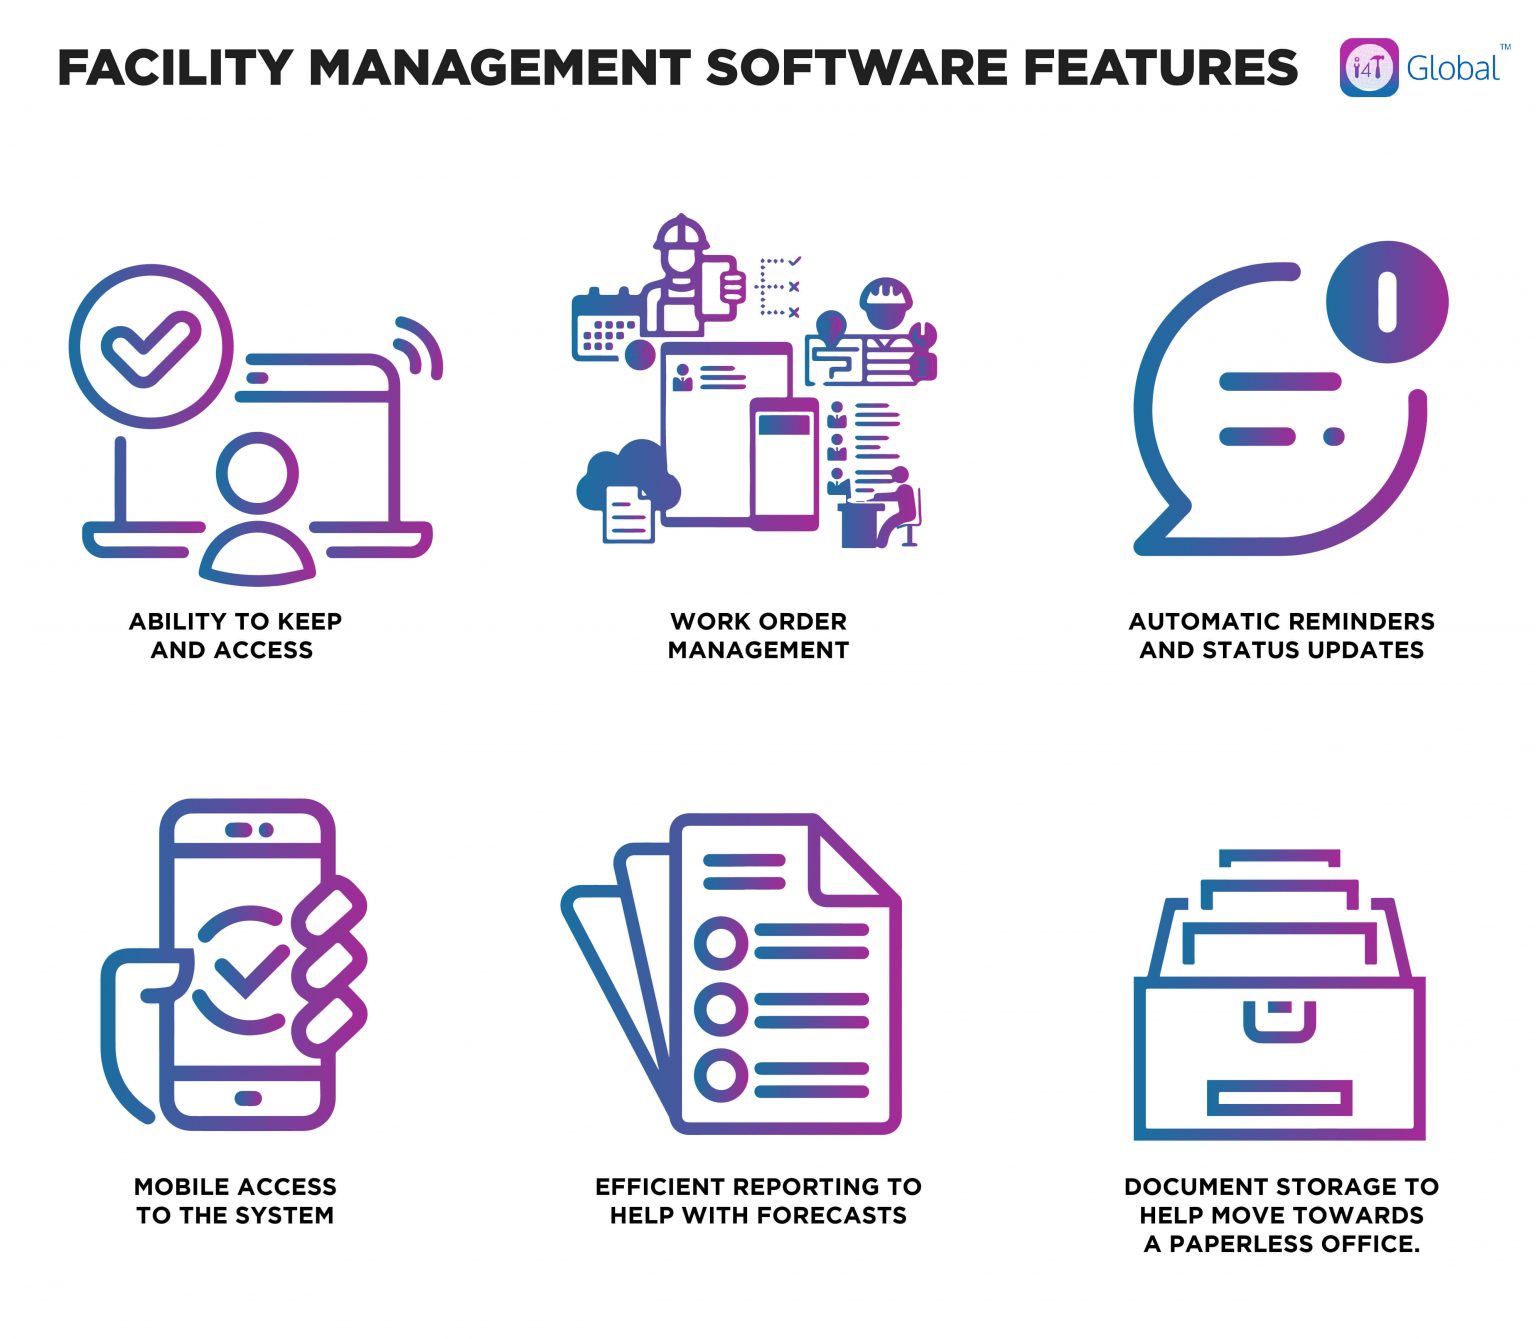 Facility management software features - i4T Global